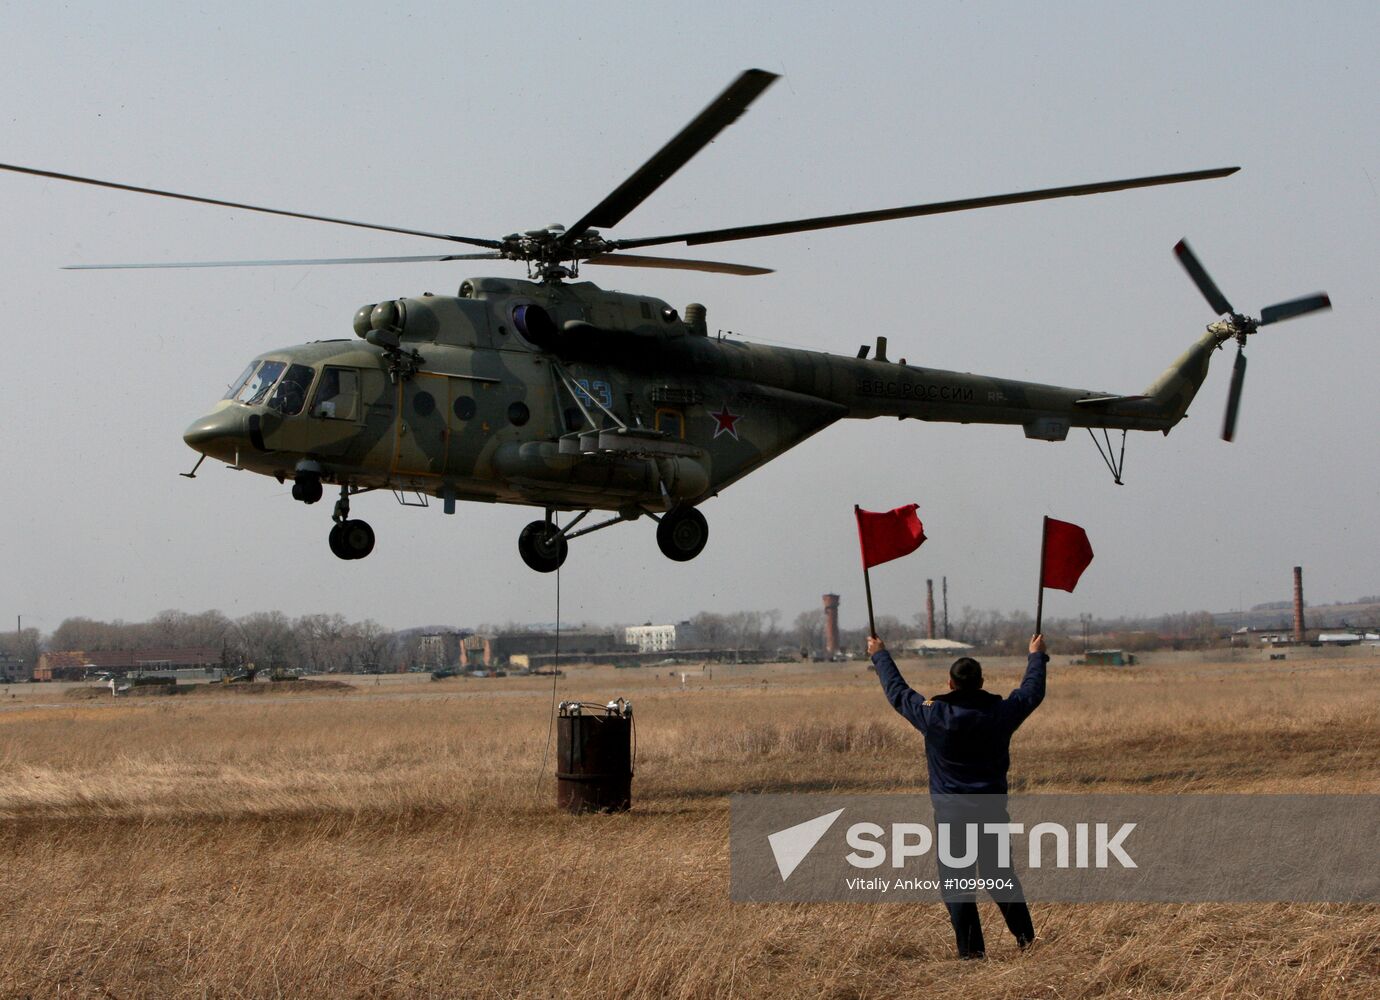 Training flights of helicopters at "Chernigov" air base